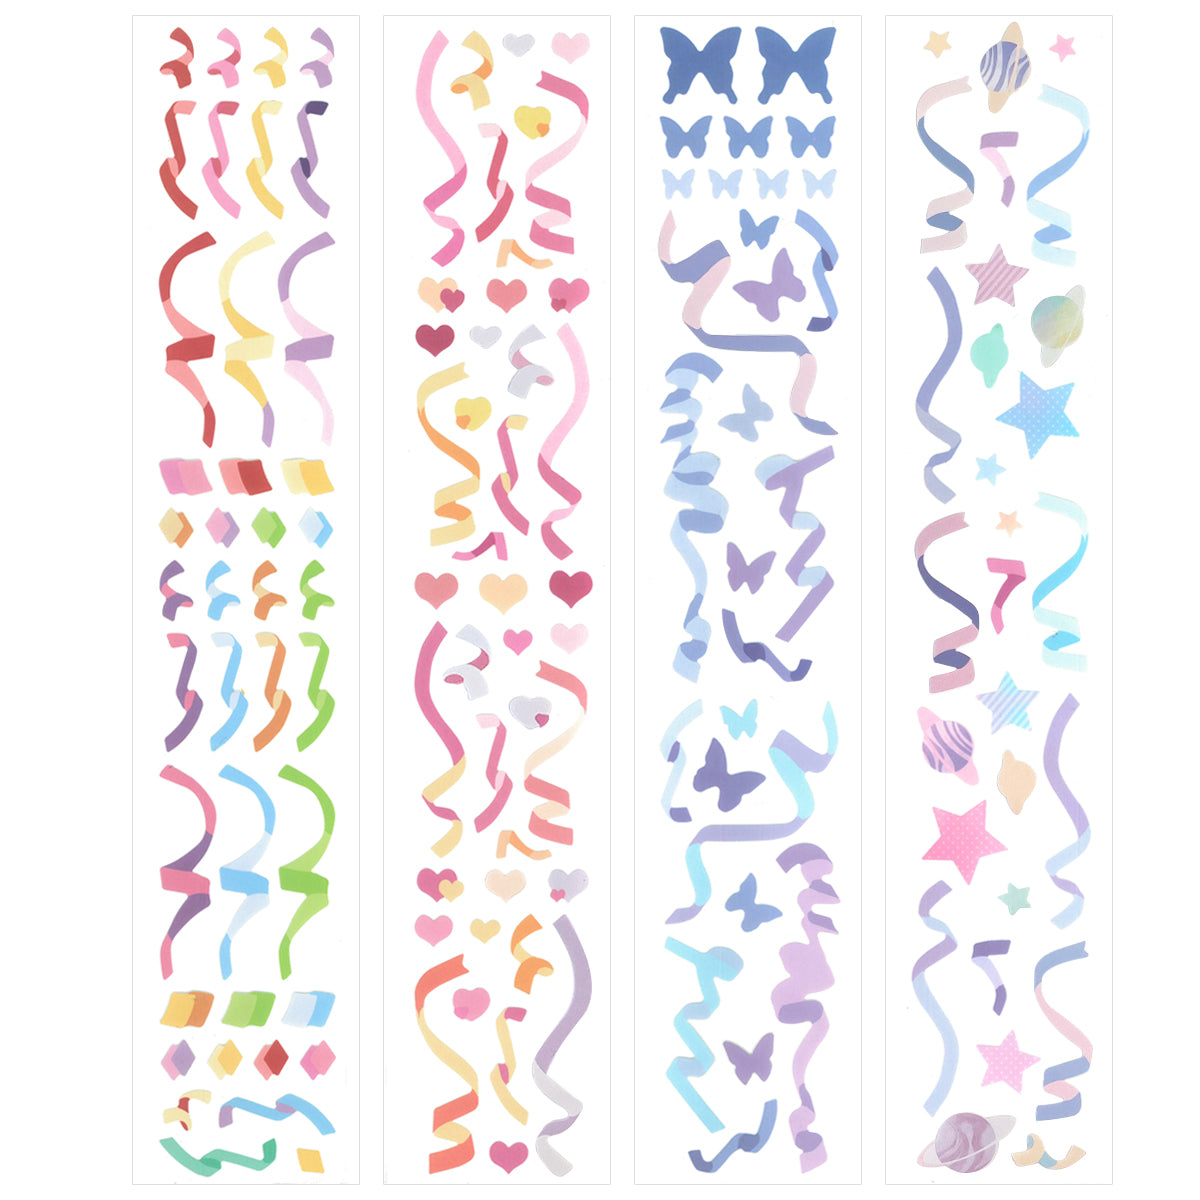 Wrapables Colorful Decorative Stickers for Scrapbooking, DIY Crafts, Stationery, Diary, Card Making